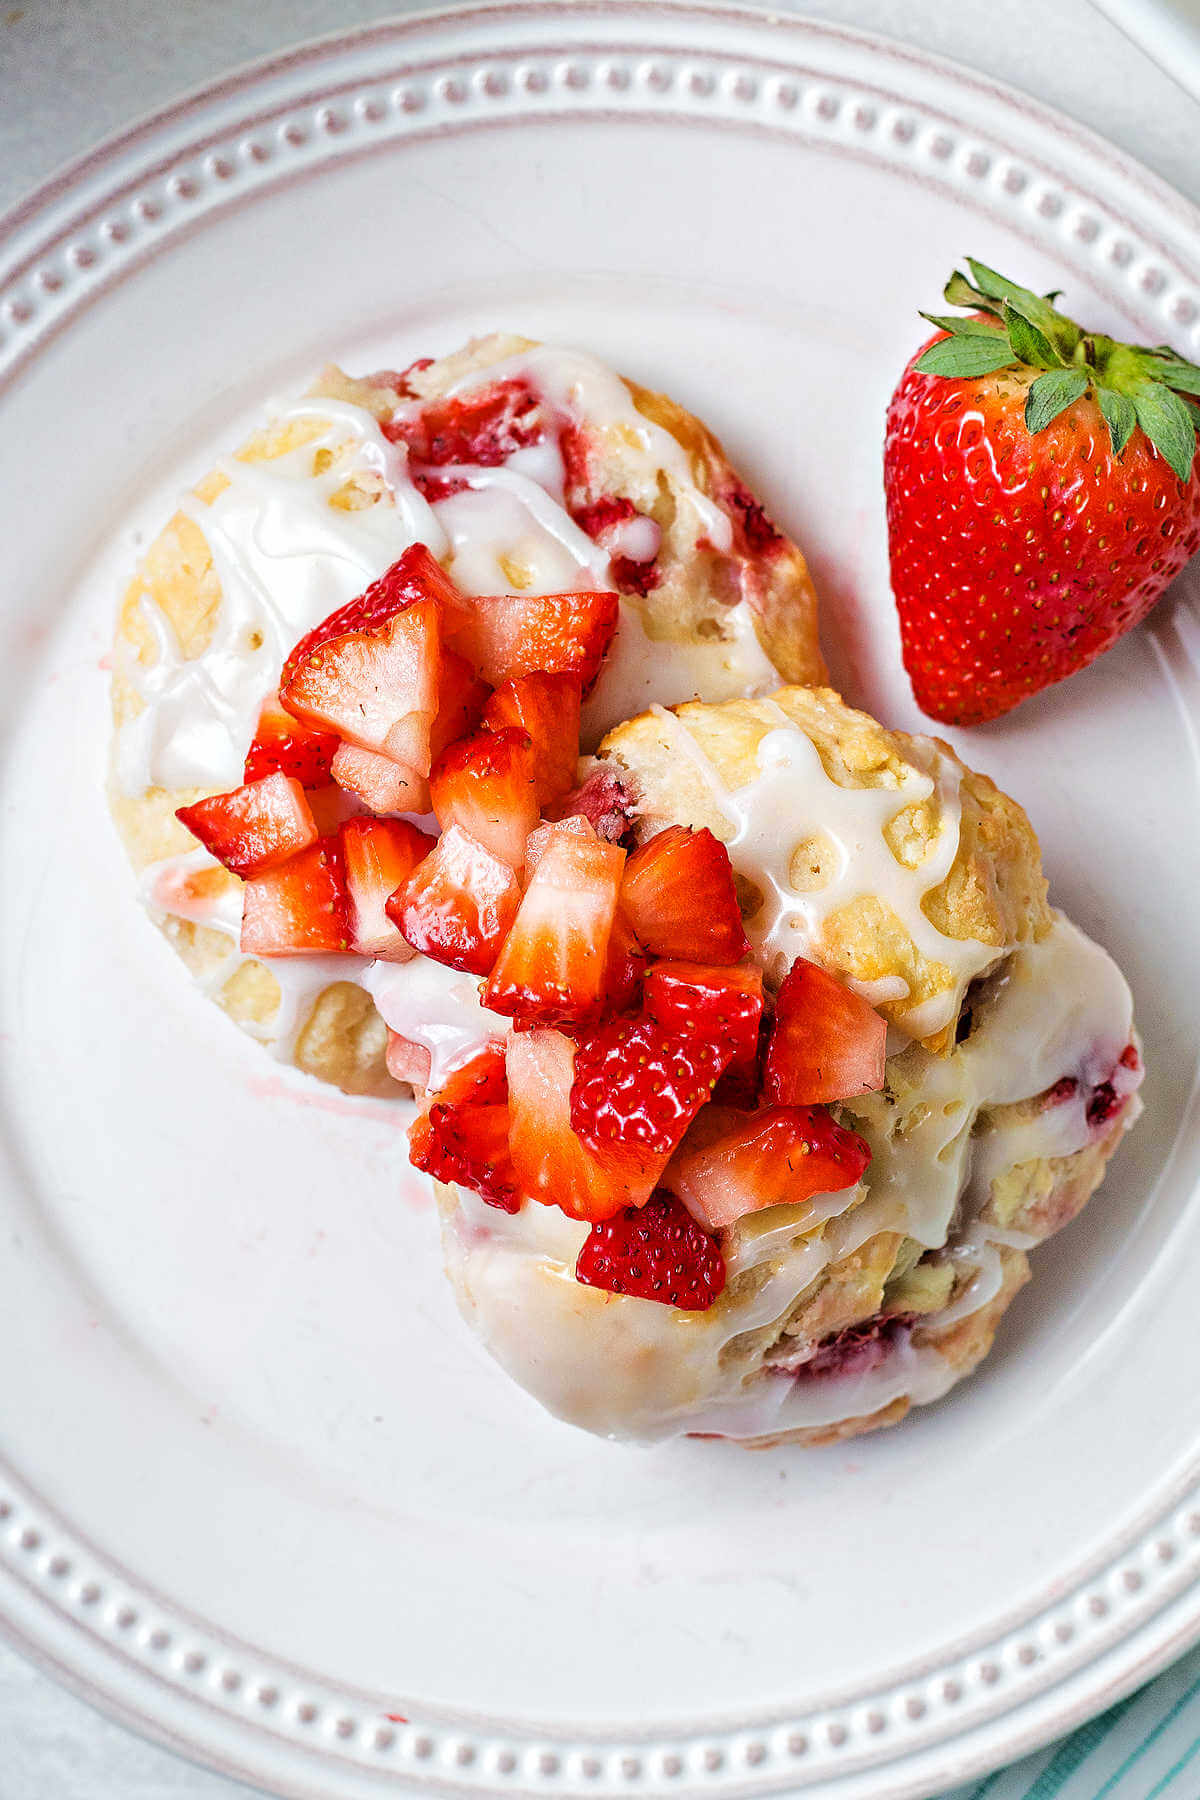 two strawberry biscuits on a white plate with more diced strawberries ladled on top and a whole strawberry to the side.